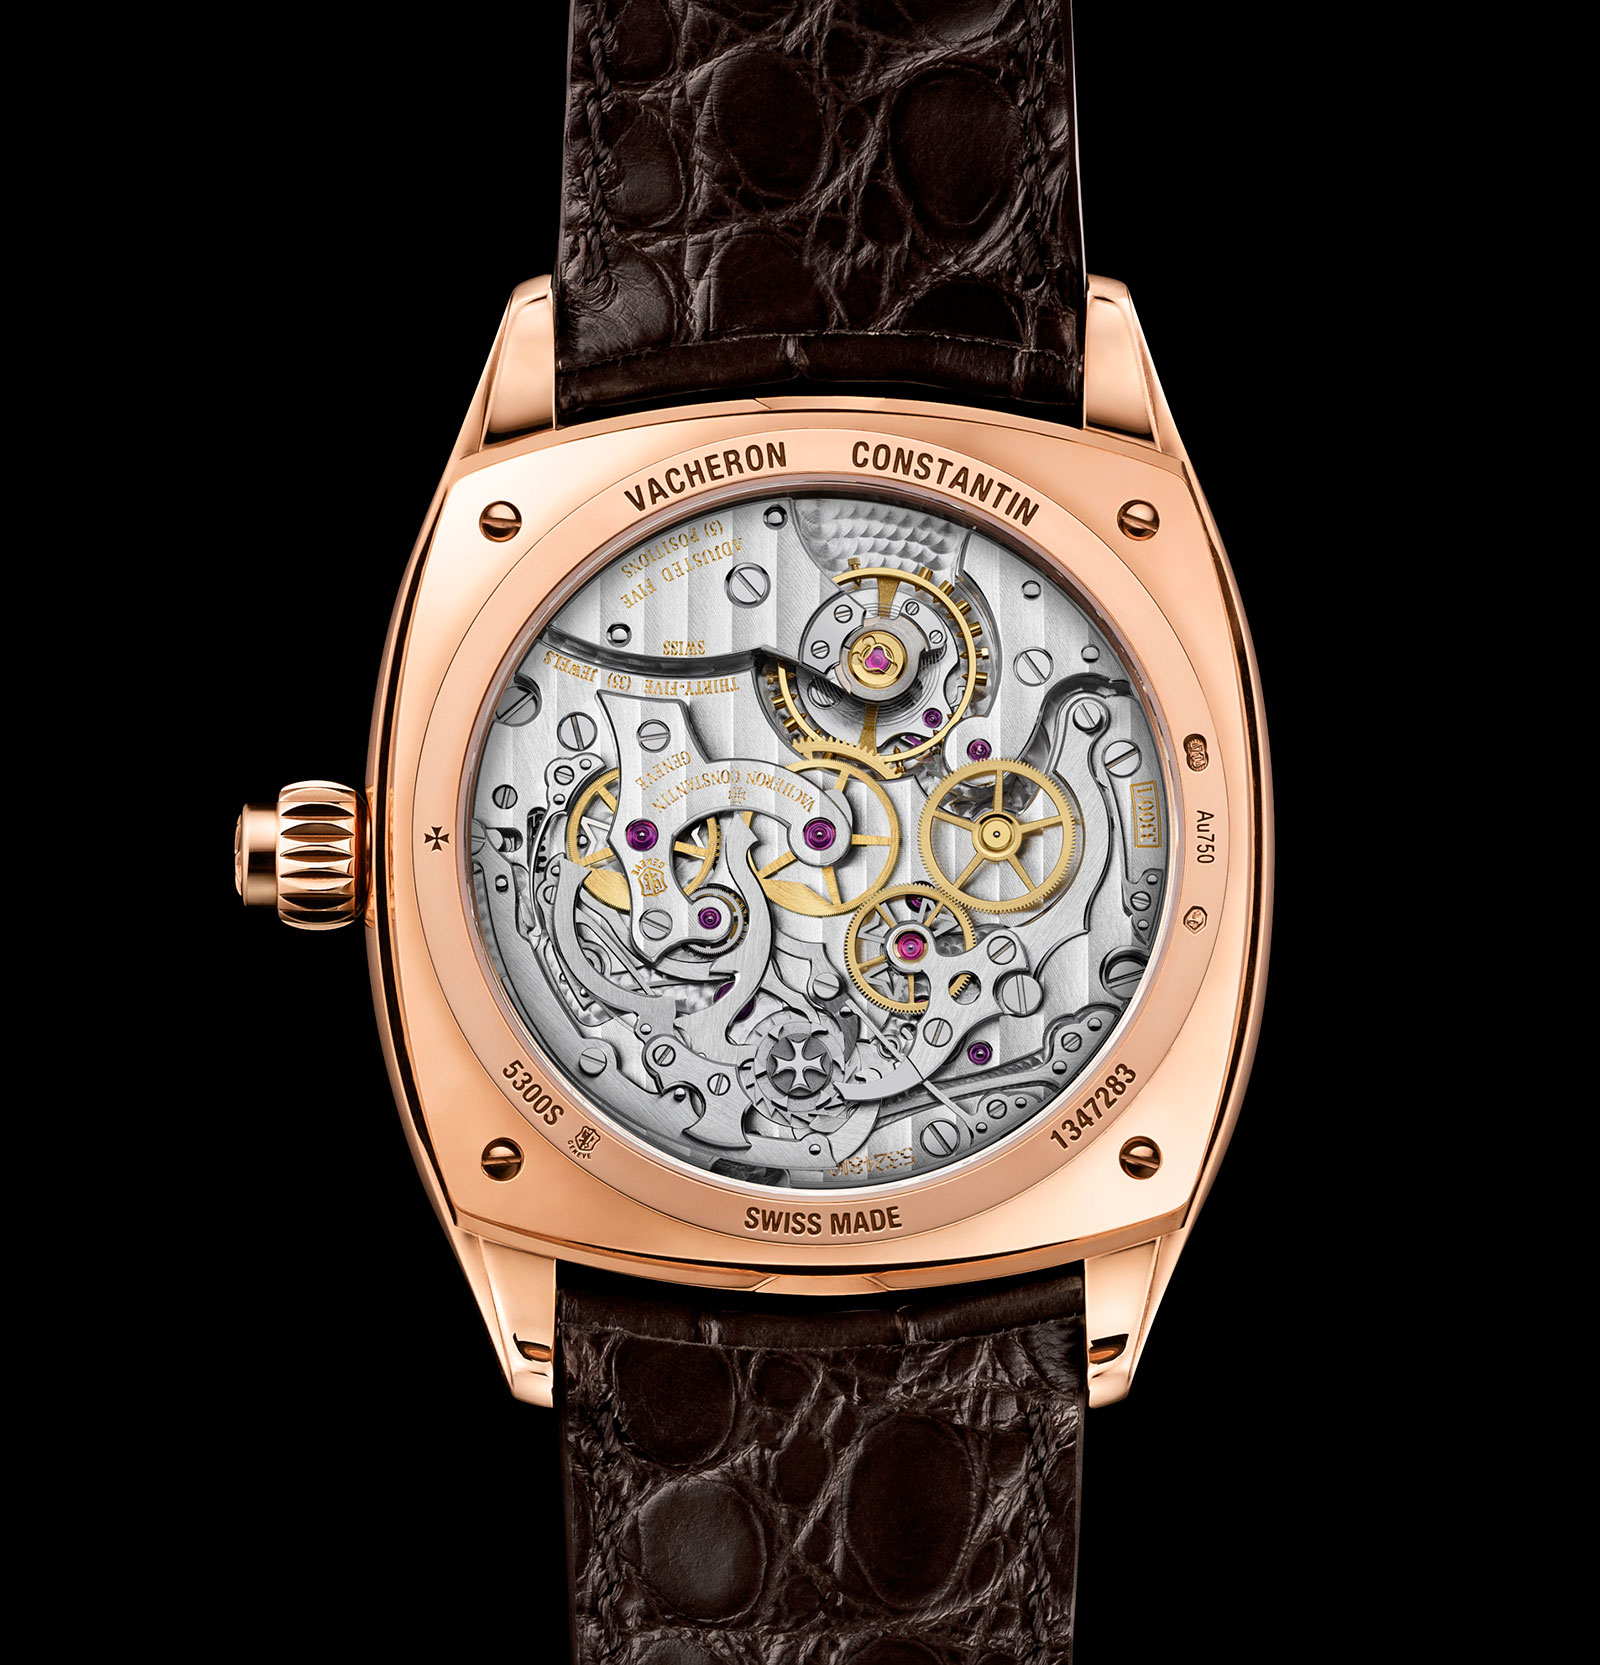 Vacheron Constantin Introduces the New Harmony Collection of 10 Watches ...